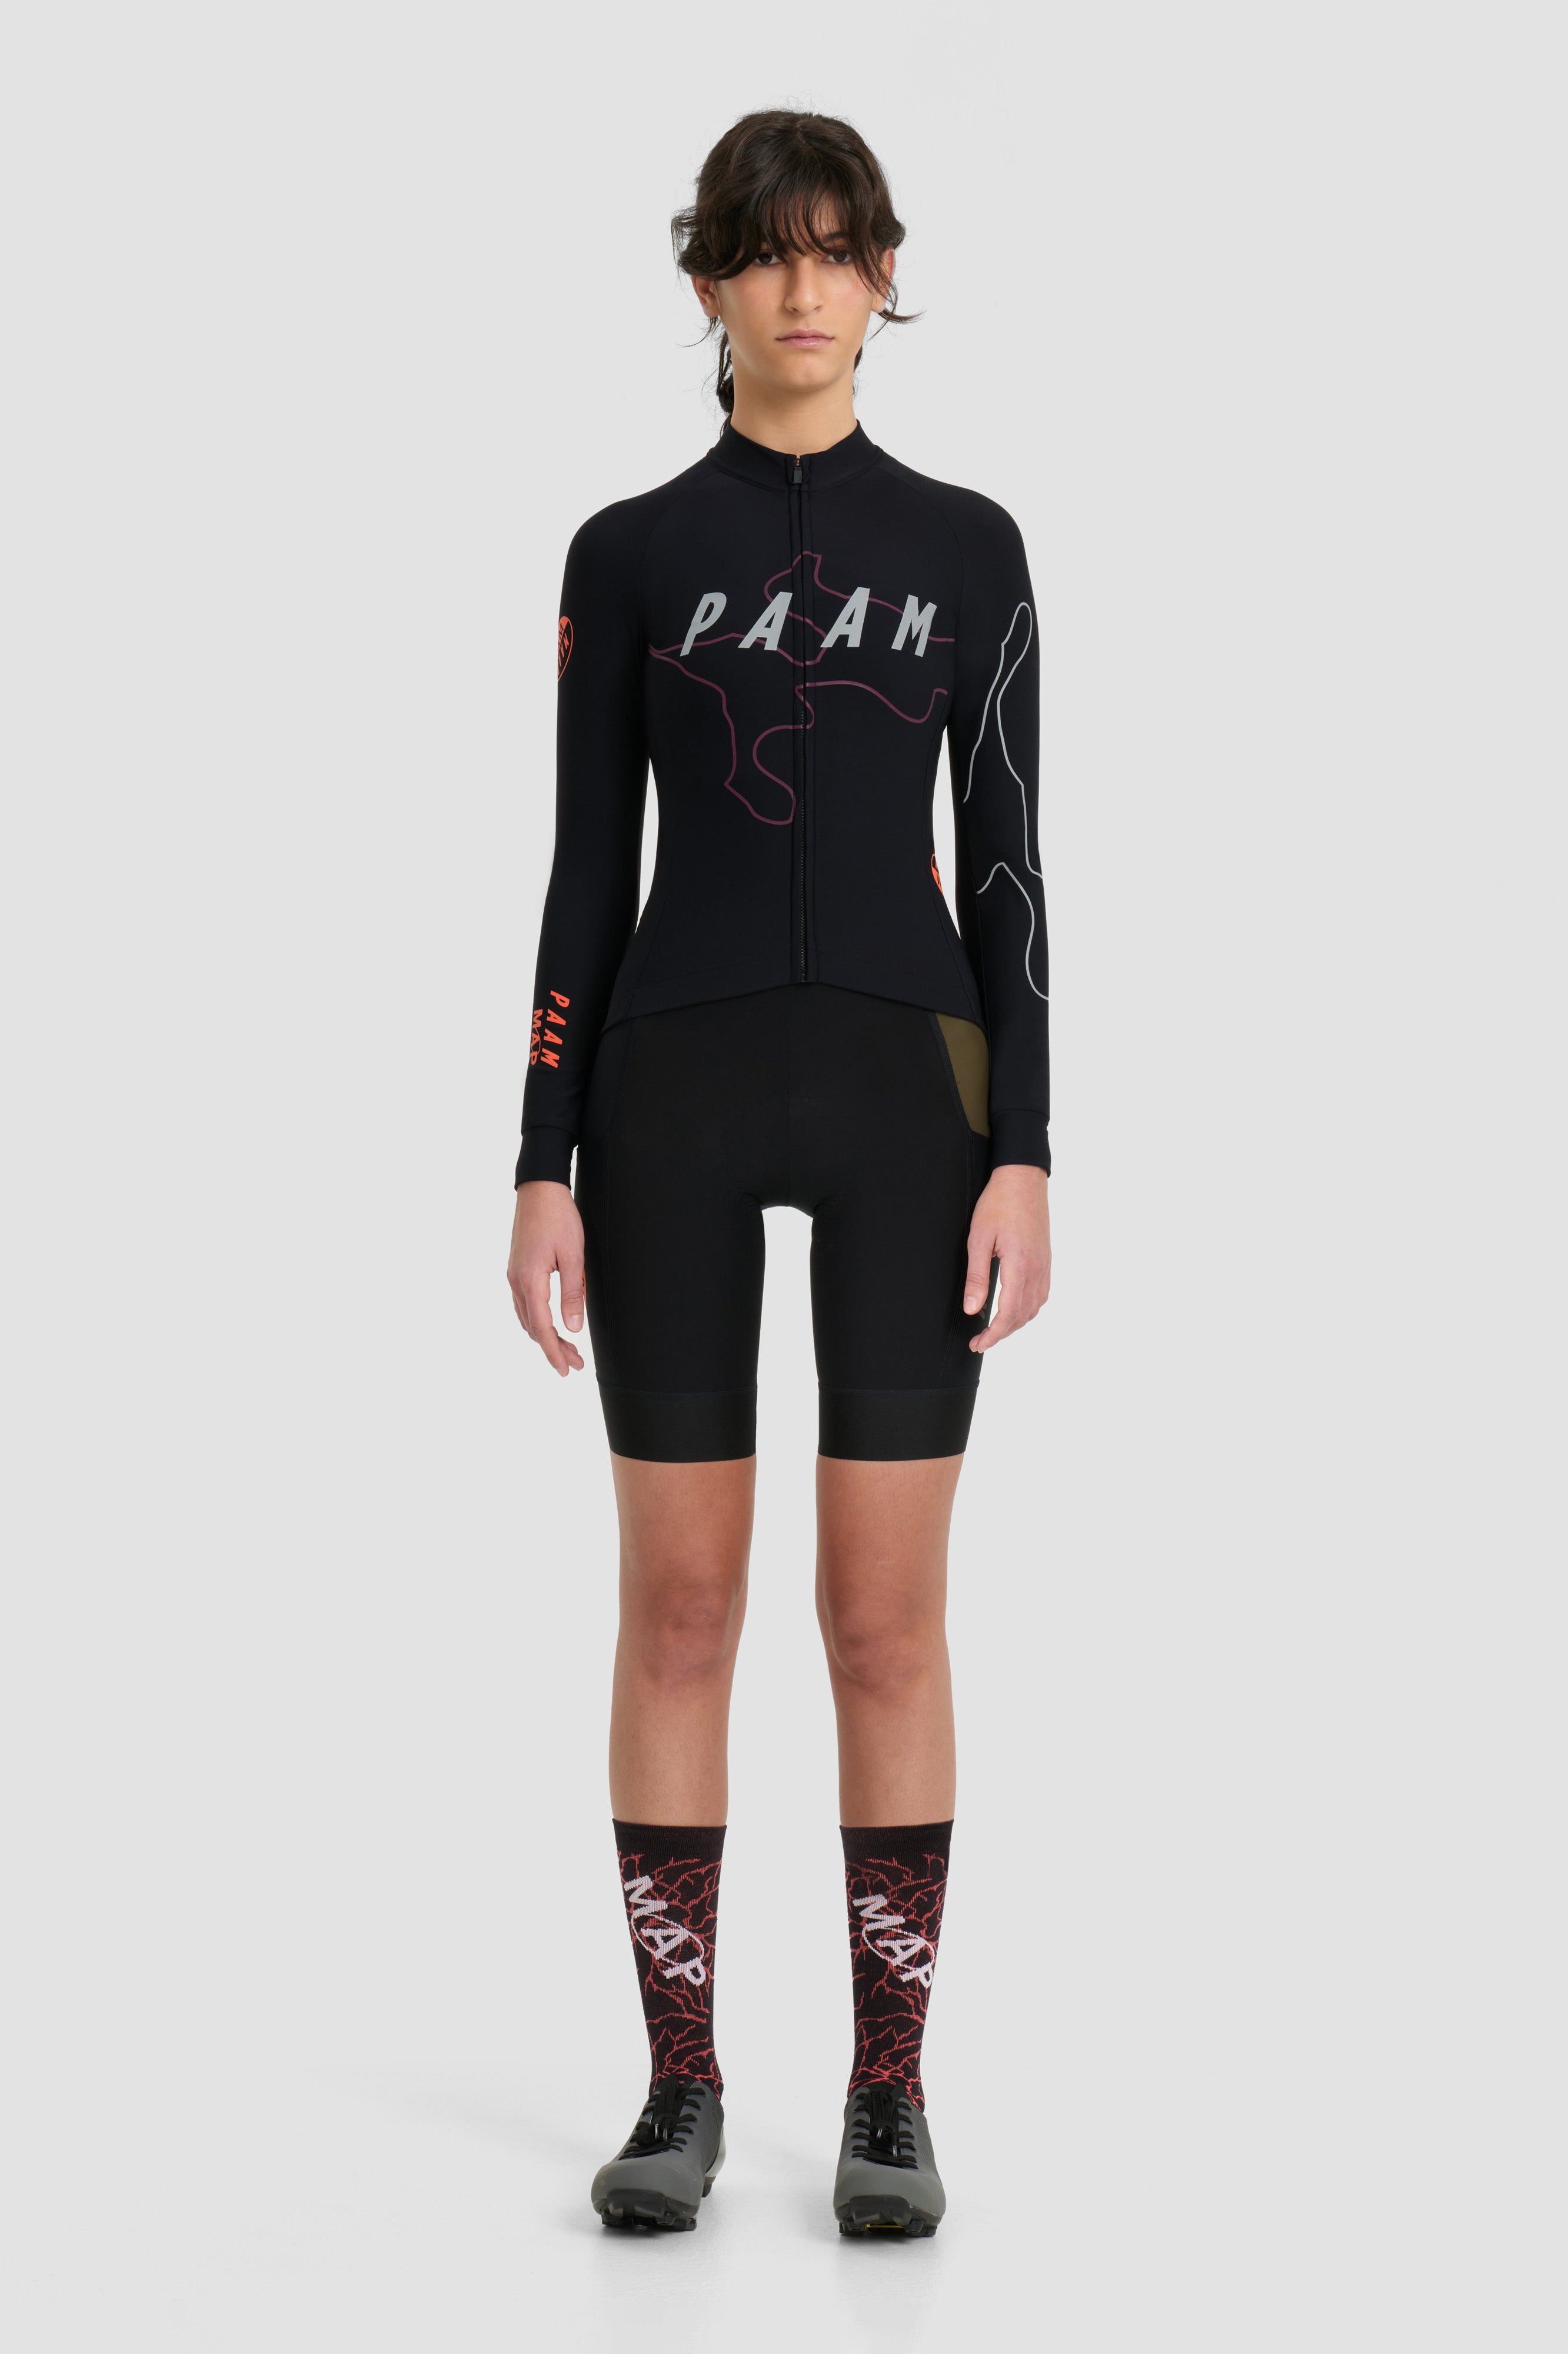 The PAAM 2.0 WOMEN'S THERMAL L/S JERSEY  available online with global shipping, and in PAM Stores Melbourne and Sydney.